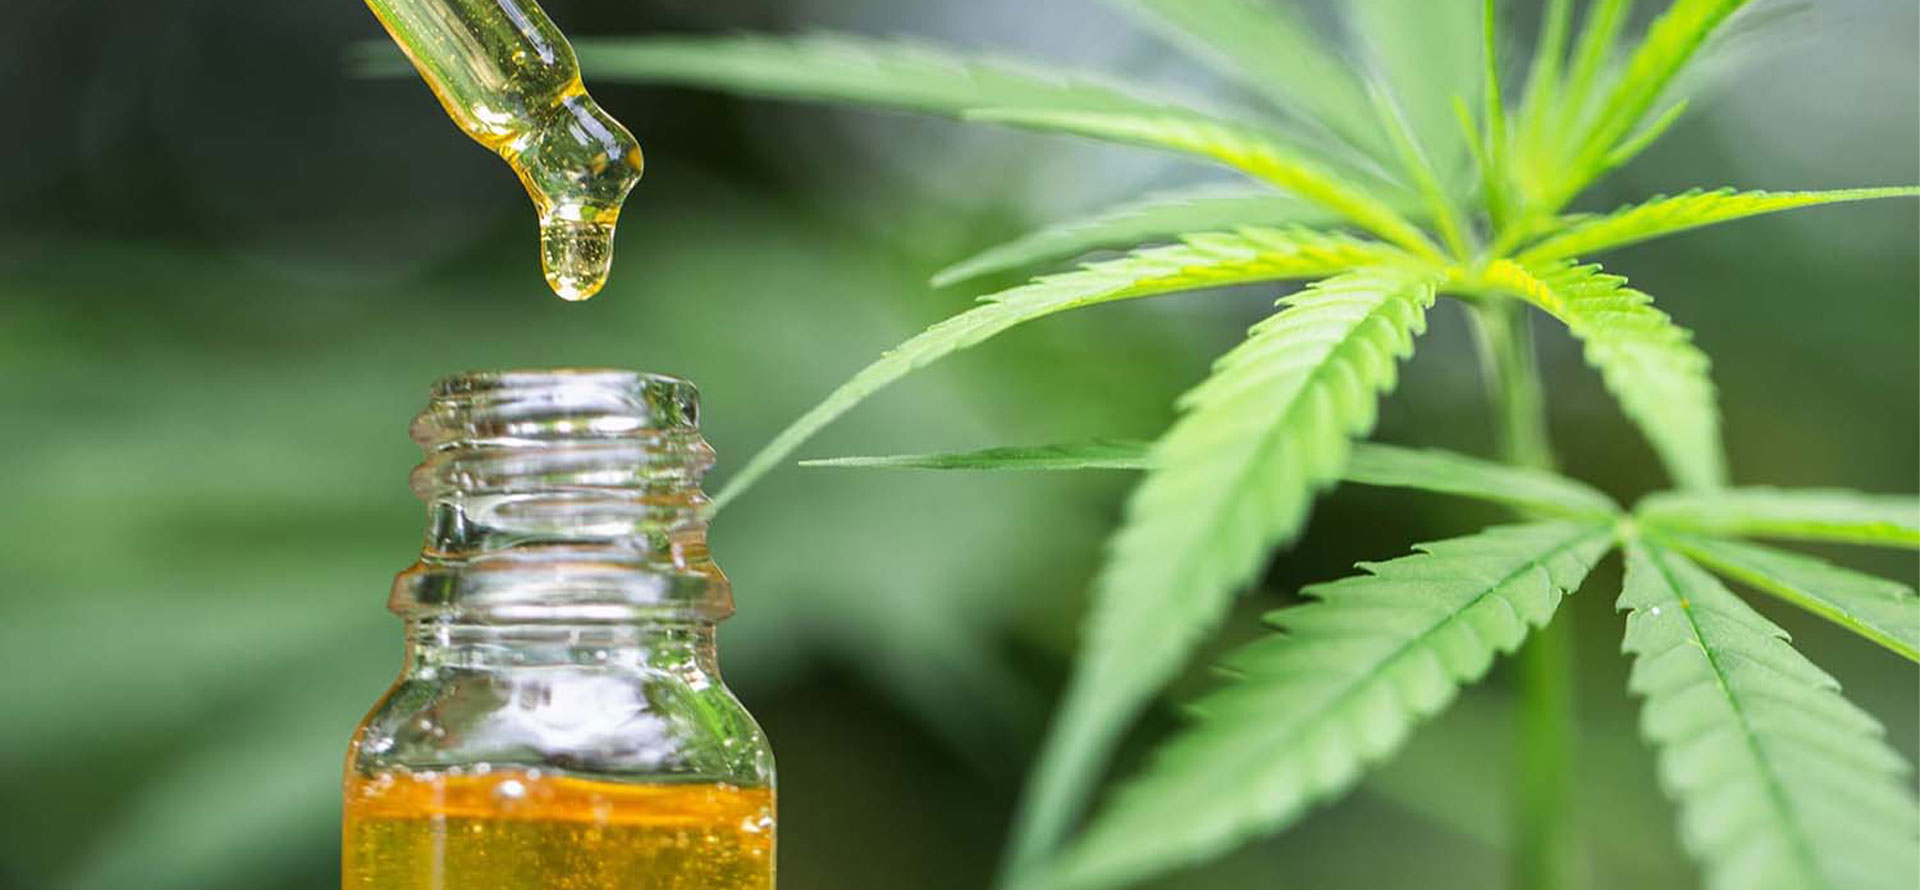 CBC OIL ONLINE - Cbd|Oil|Benefits|Cbc|Effects|Pain|Study|Health|Thc|Products|Cannabinoids|Studies|Research|Anxiety|Cannabis|Symptoms|Evidence|People|System|Disease|Treatment|Inflammation|Hemp|Body|Receptors|Disorders|Brain|Plant|Cells|Side|Effect|Blood|Patients|Cancer|Product|Skin|Marijuana|Properties|Cannabidiol|Cannabinoid|Cbd Oil|Cbd Products|Cbc Oil|Side Effects|Endocannabinoid System|Chronic Pain|Multiple Sclerosis|Pain Relief|Cannabis Plant|Cbd Oil Benefits|Blood Pressure|Health Benefits|High Blood Pressure|Anti-Inflammatory Properties|Neuropathic Pain|Animal Studies|Hemp Plant|Hemp Oil|Anxiety Disorders|Cbd Product|Immune System|Clinical Trials|Cbd Gummies|Nerve Cells|Nervous System|Entourage Effect|Hemp Seed Oil|United States|Cbd Oils|Drug Administration